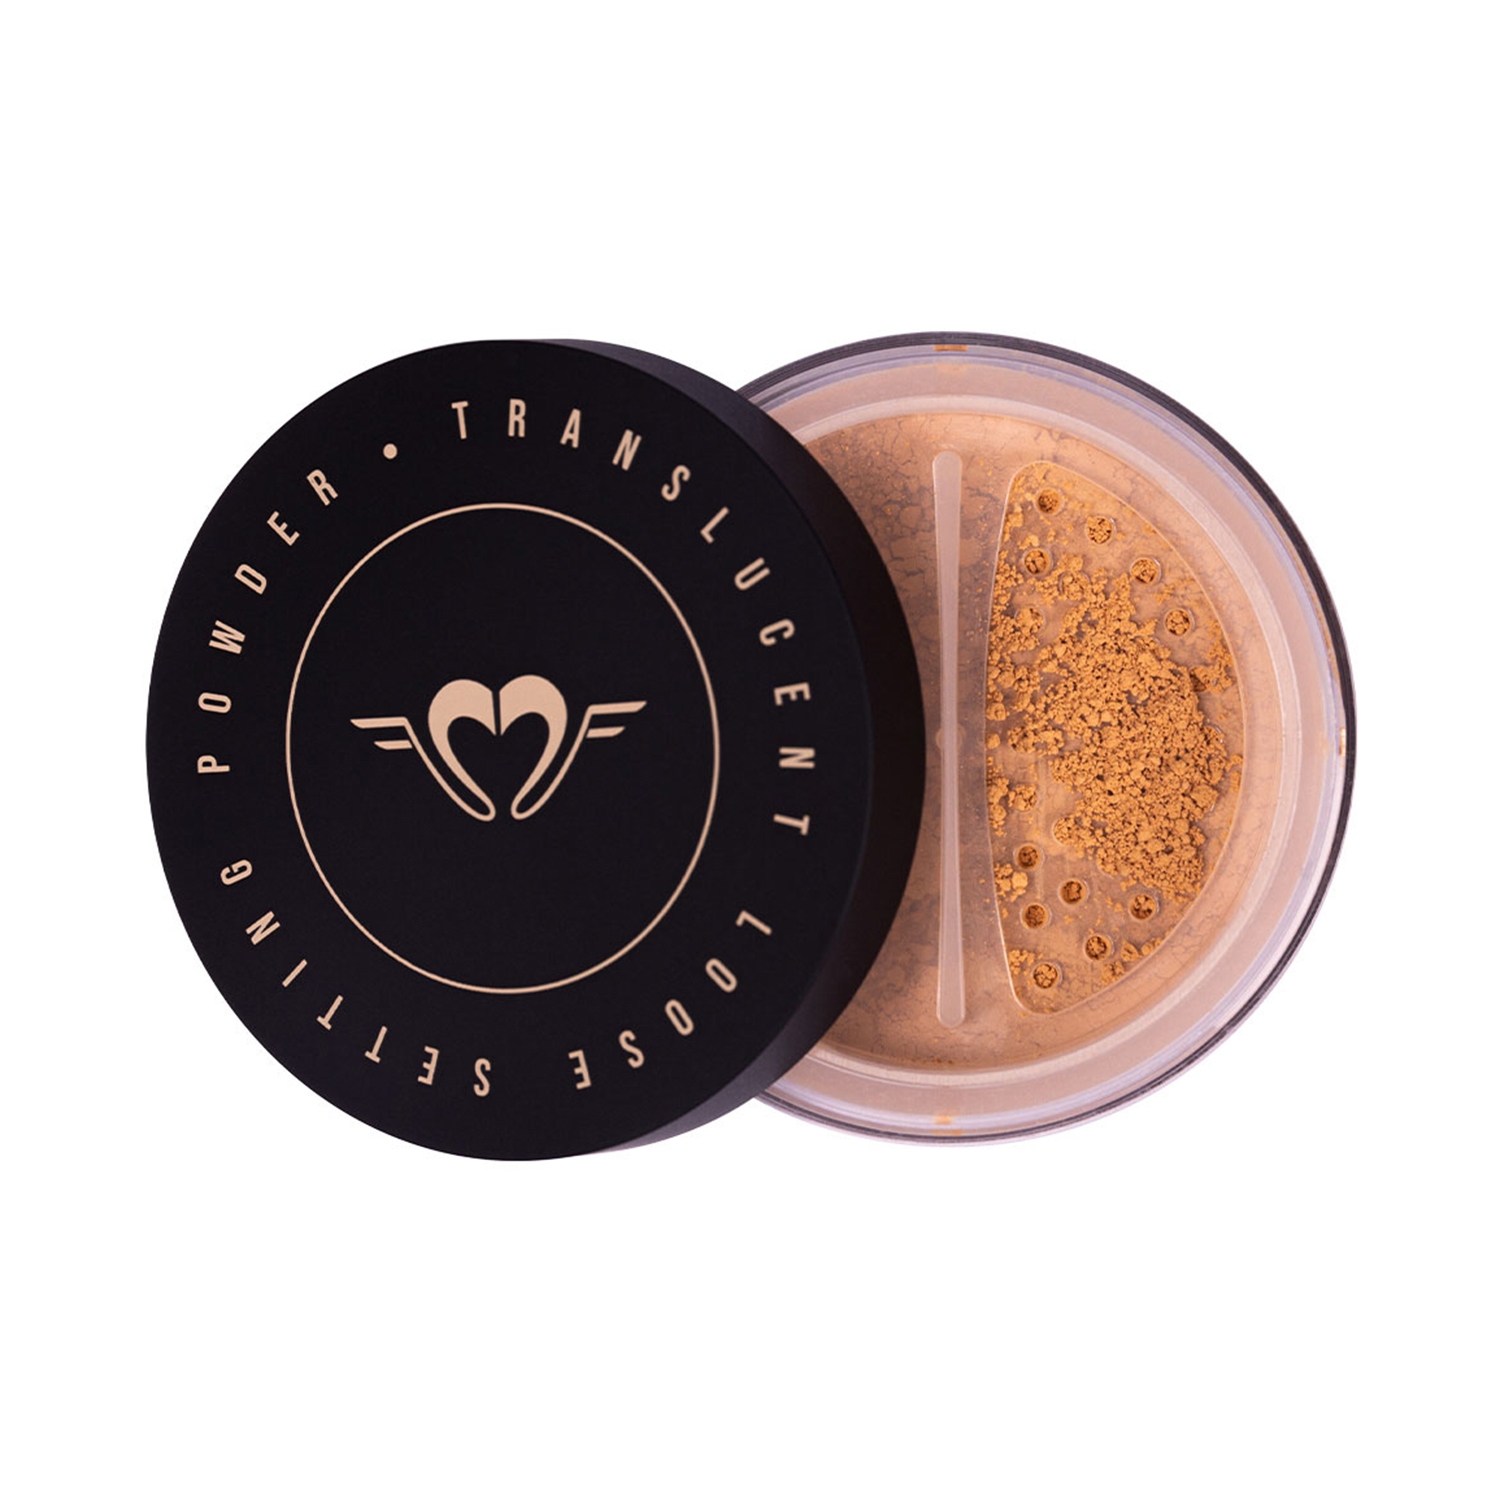 Daily Life Forever52 | Daily Life Forever52 Translucent Loose Setting Powder TLM006 - Classic Beige (7g)